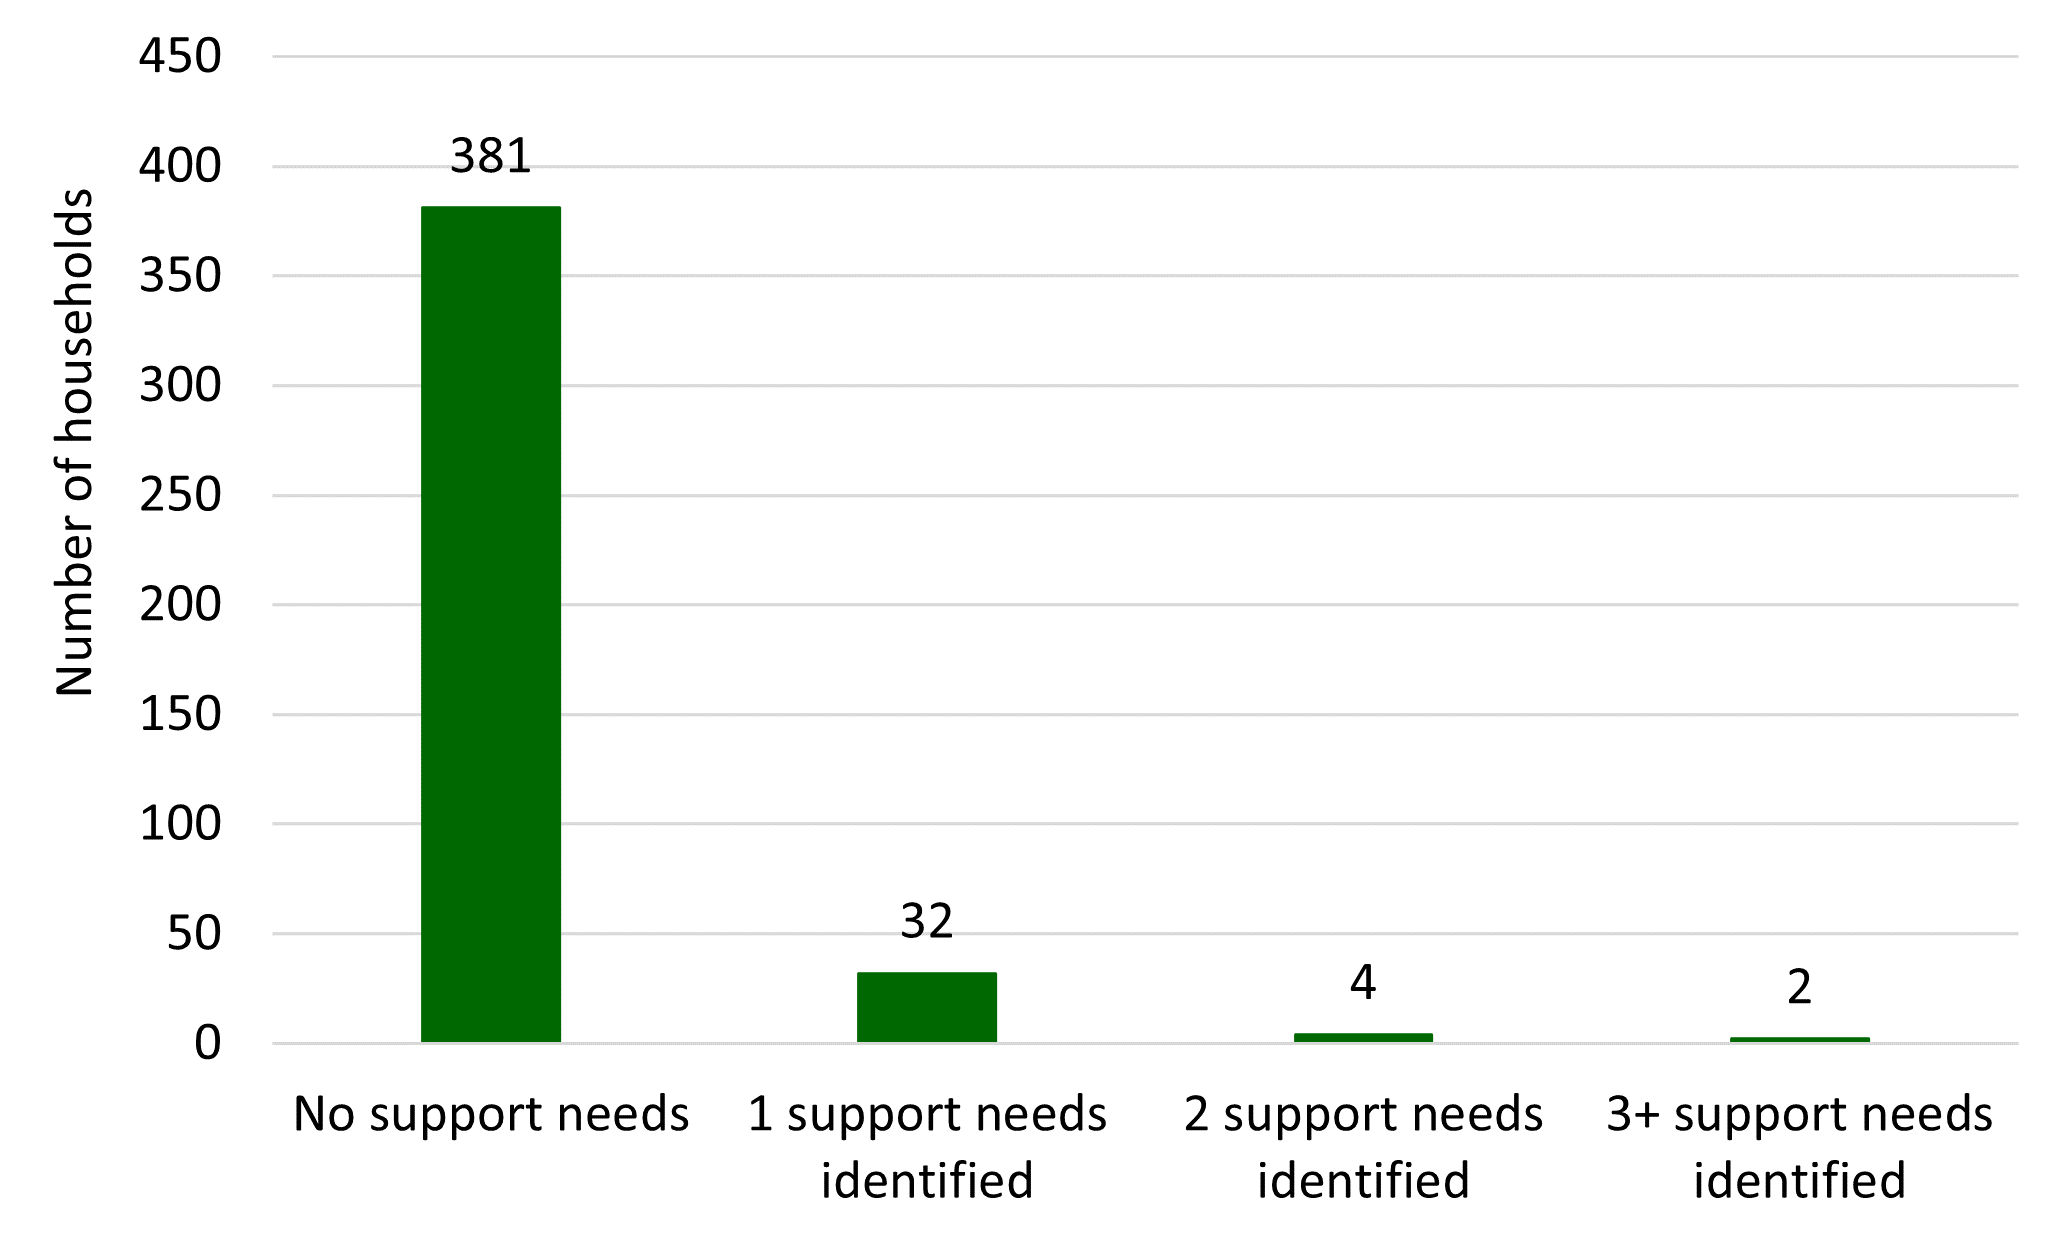 Bar chart showing in 2021/22 the vast majority of homeless households in Midlothian (381) had no support needs, while 32 households had 1 support need identified.